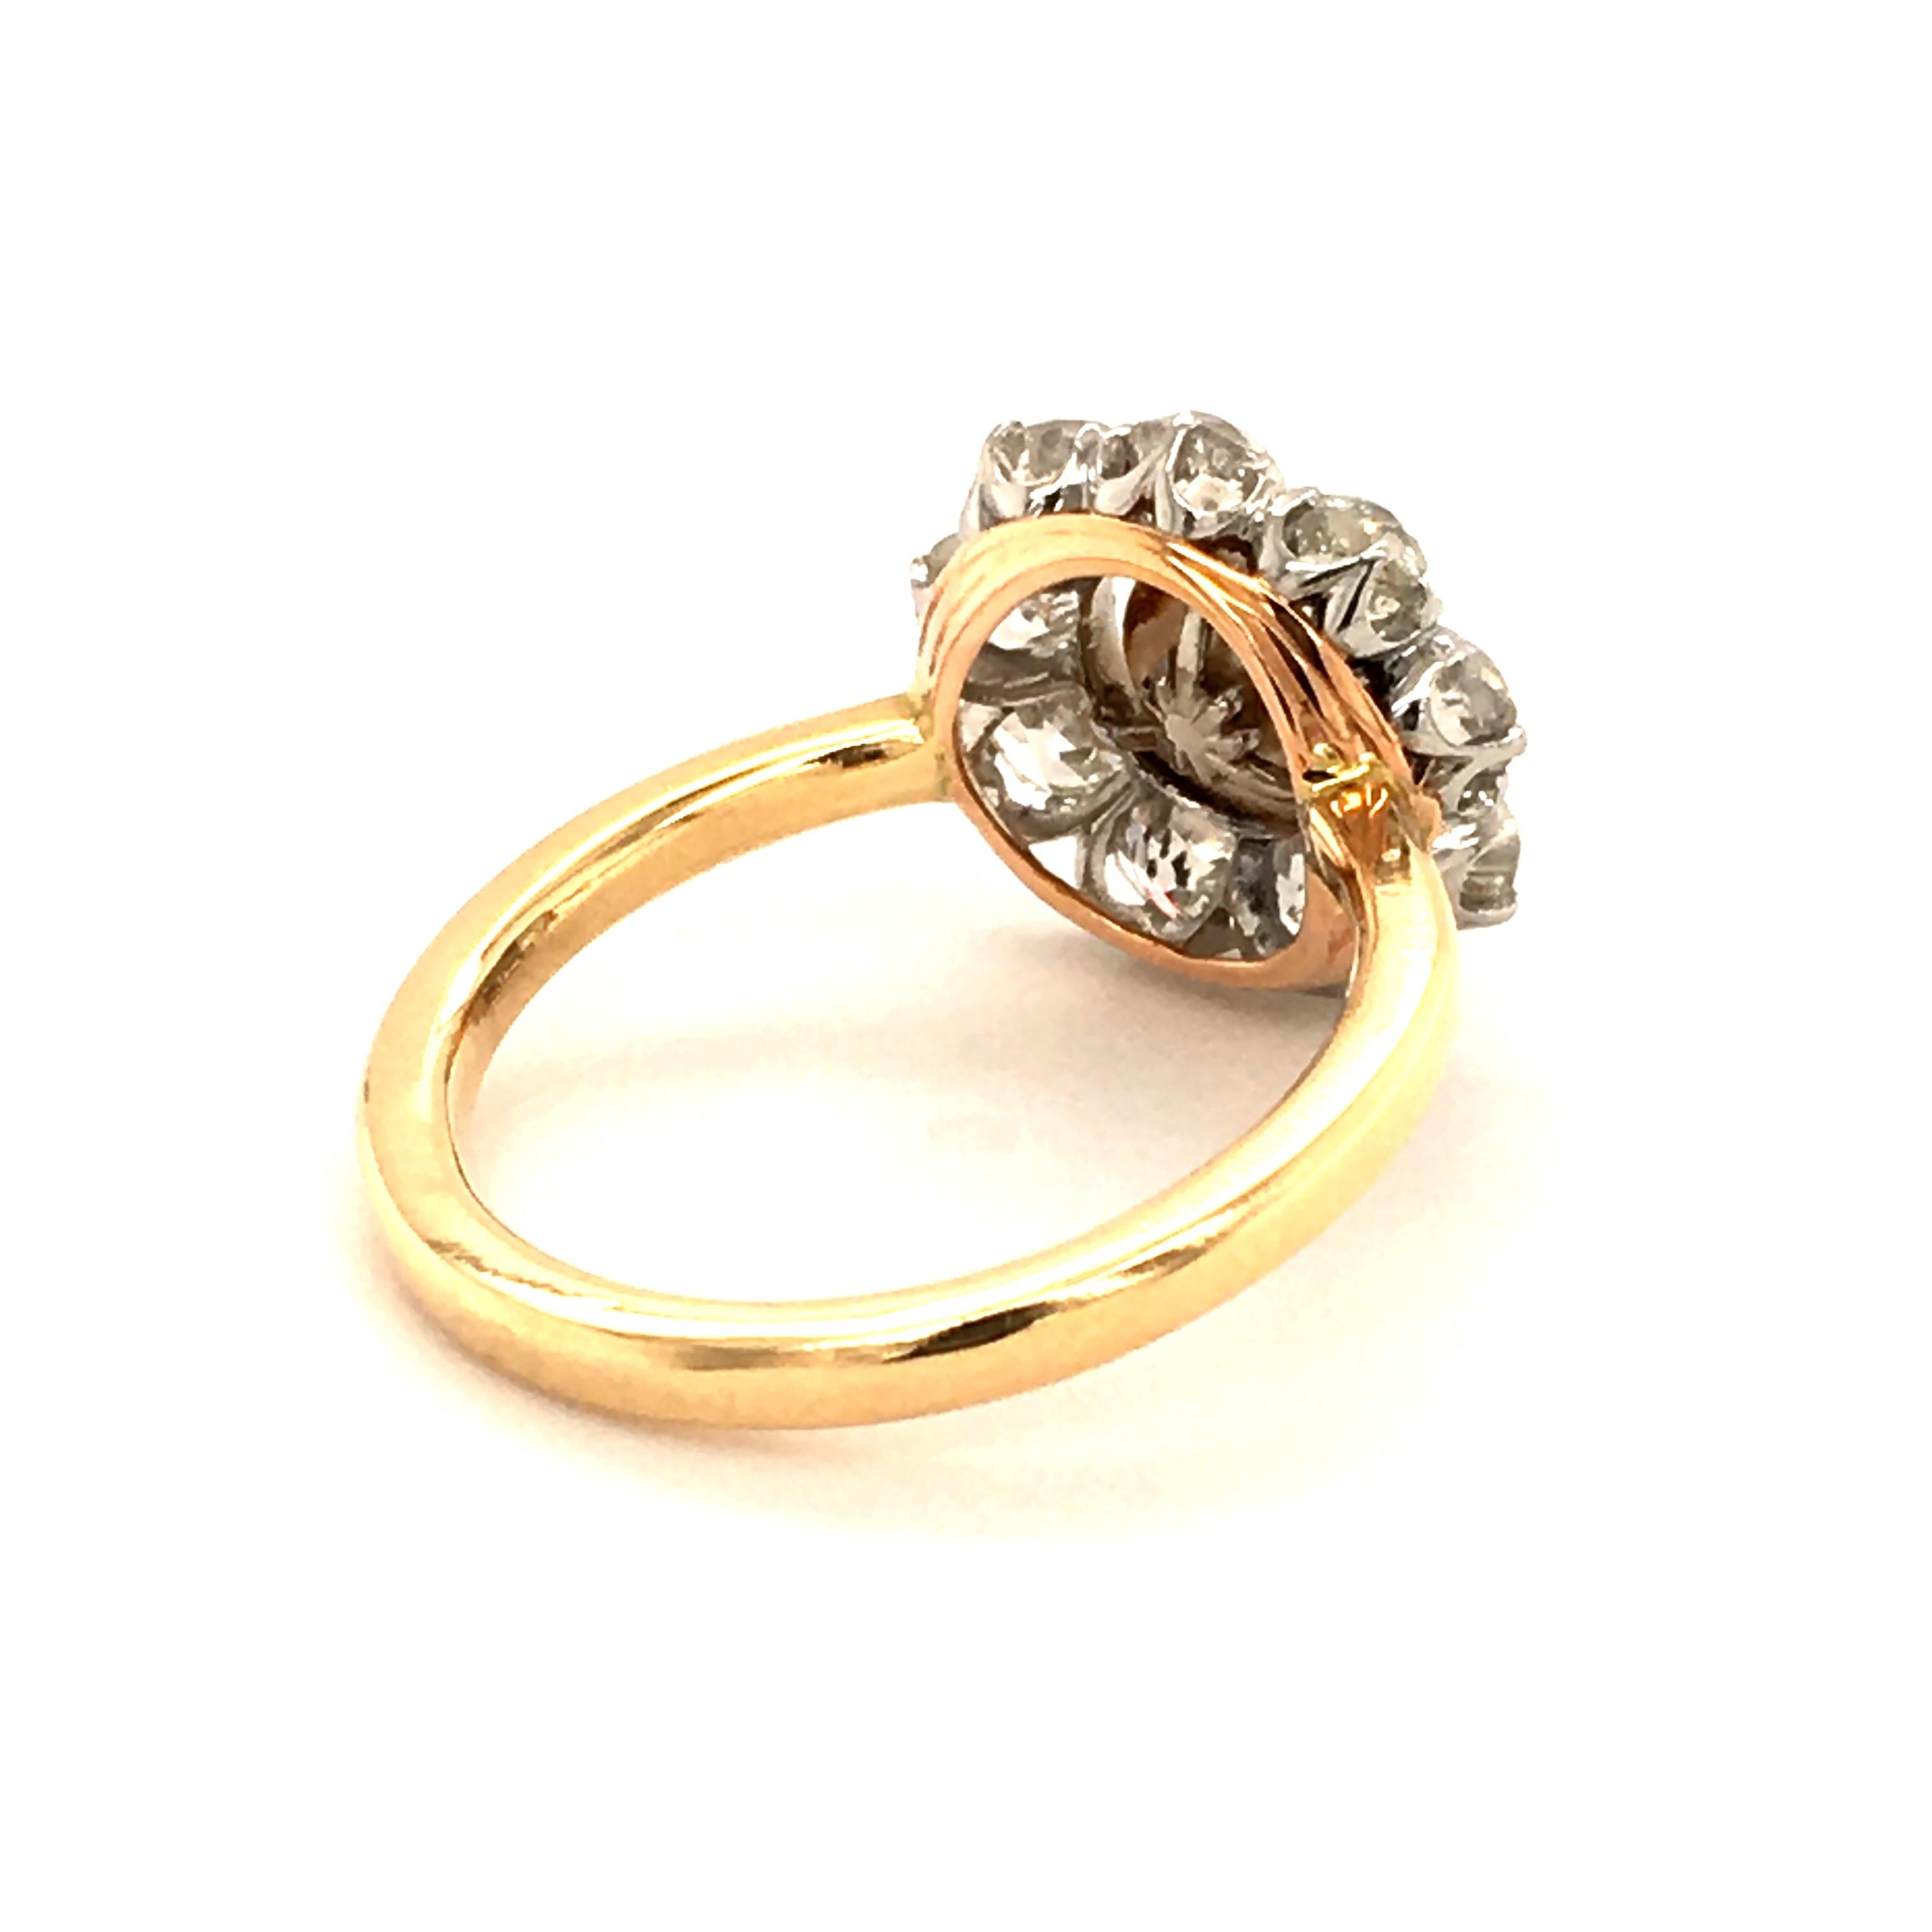 Old European Cut Gold Ring Set with a Natural Pearl Surrounded by Oldcut-Diamonds